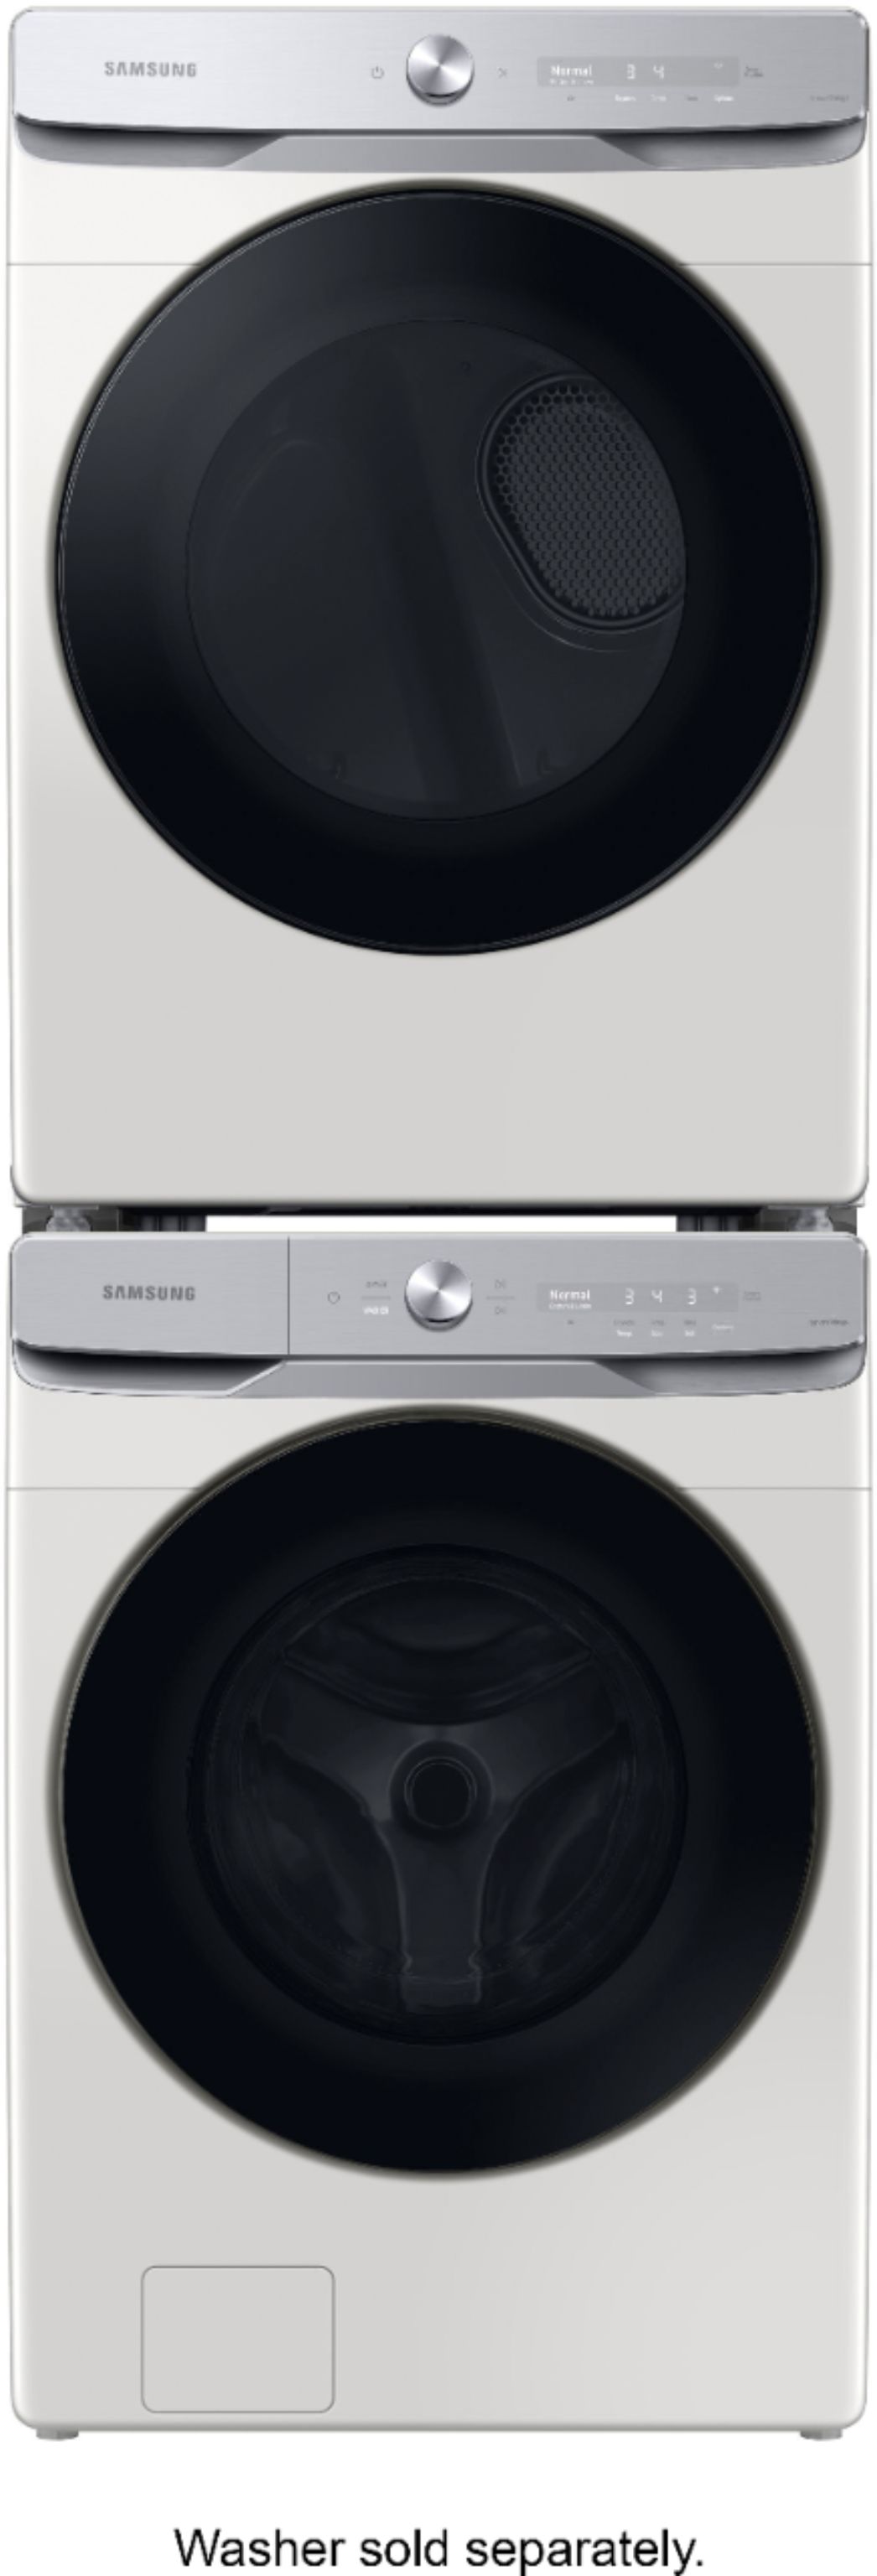 Samsung DVG50A8600E Front Load Gas Dryer